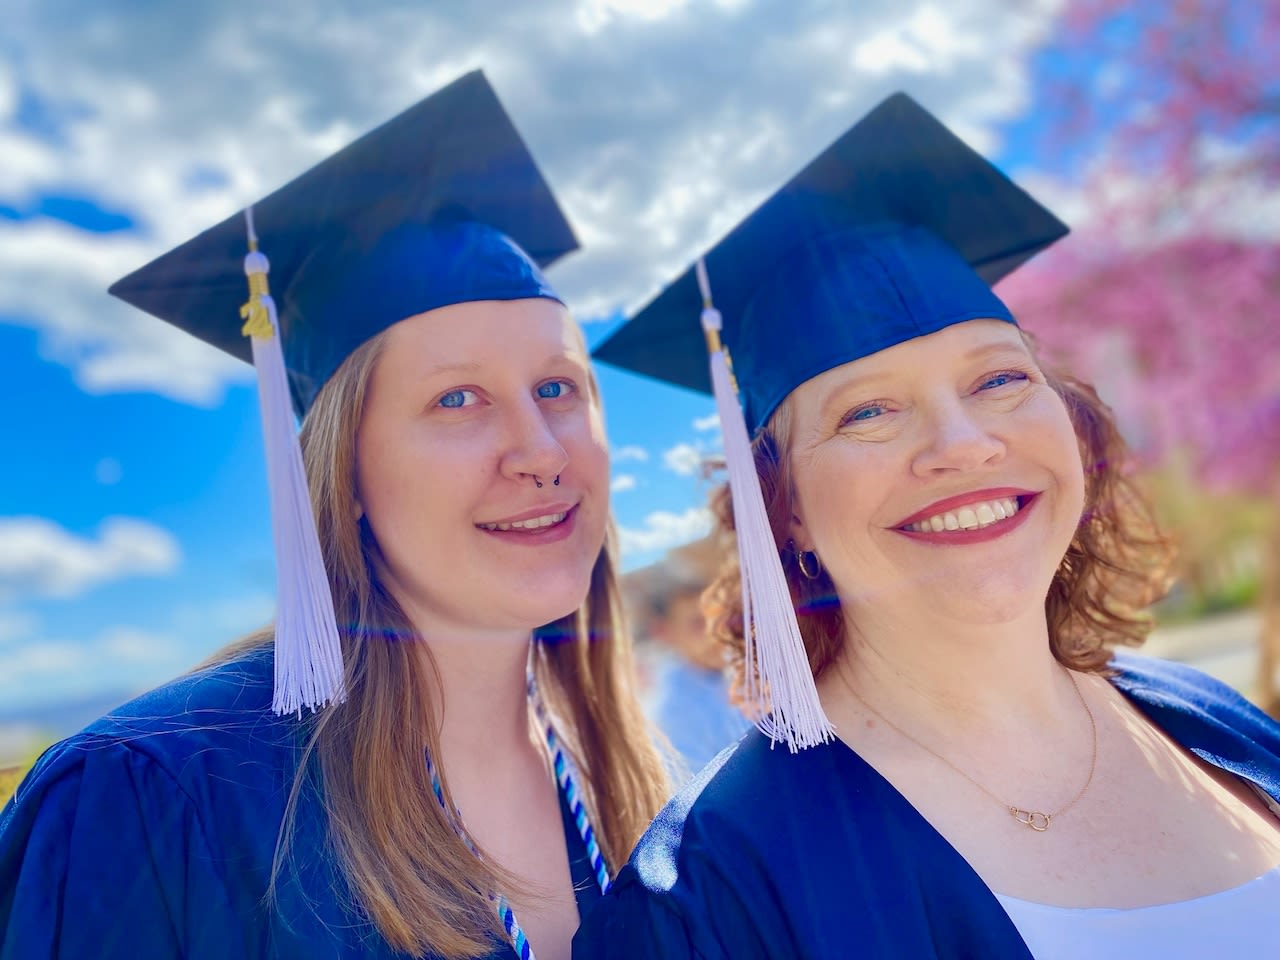 Mother, daughter graduate Penn State together after taking far different paths